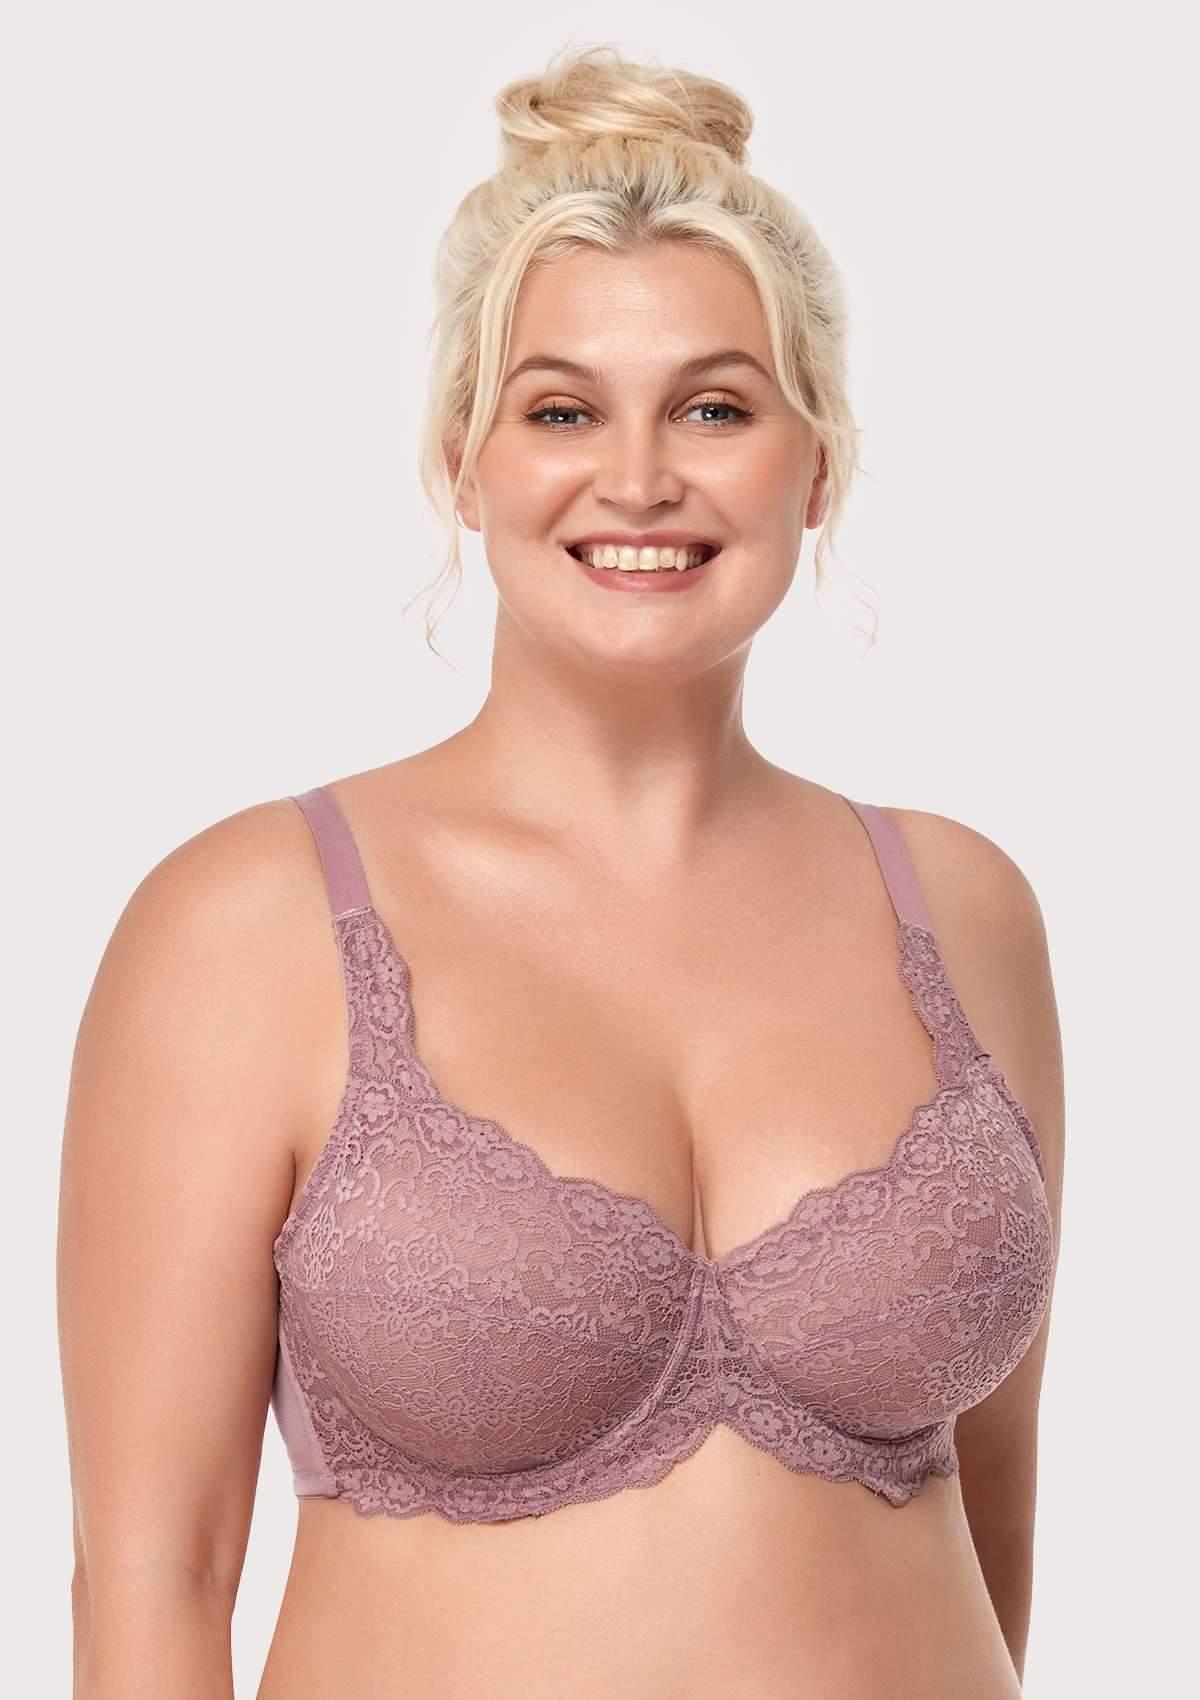 HSIA All-Over Floral Lace Unlined Bra: Minimizer Bra For Heavy Breasts - Purple / 38 / DDD/F